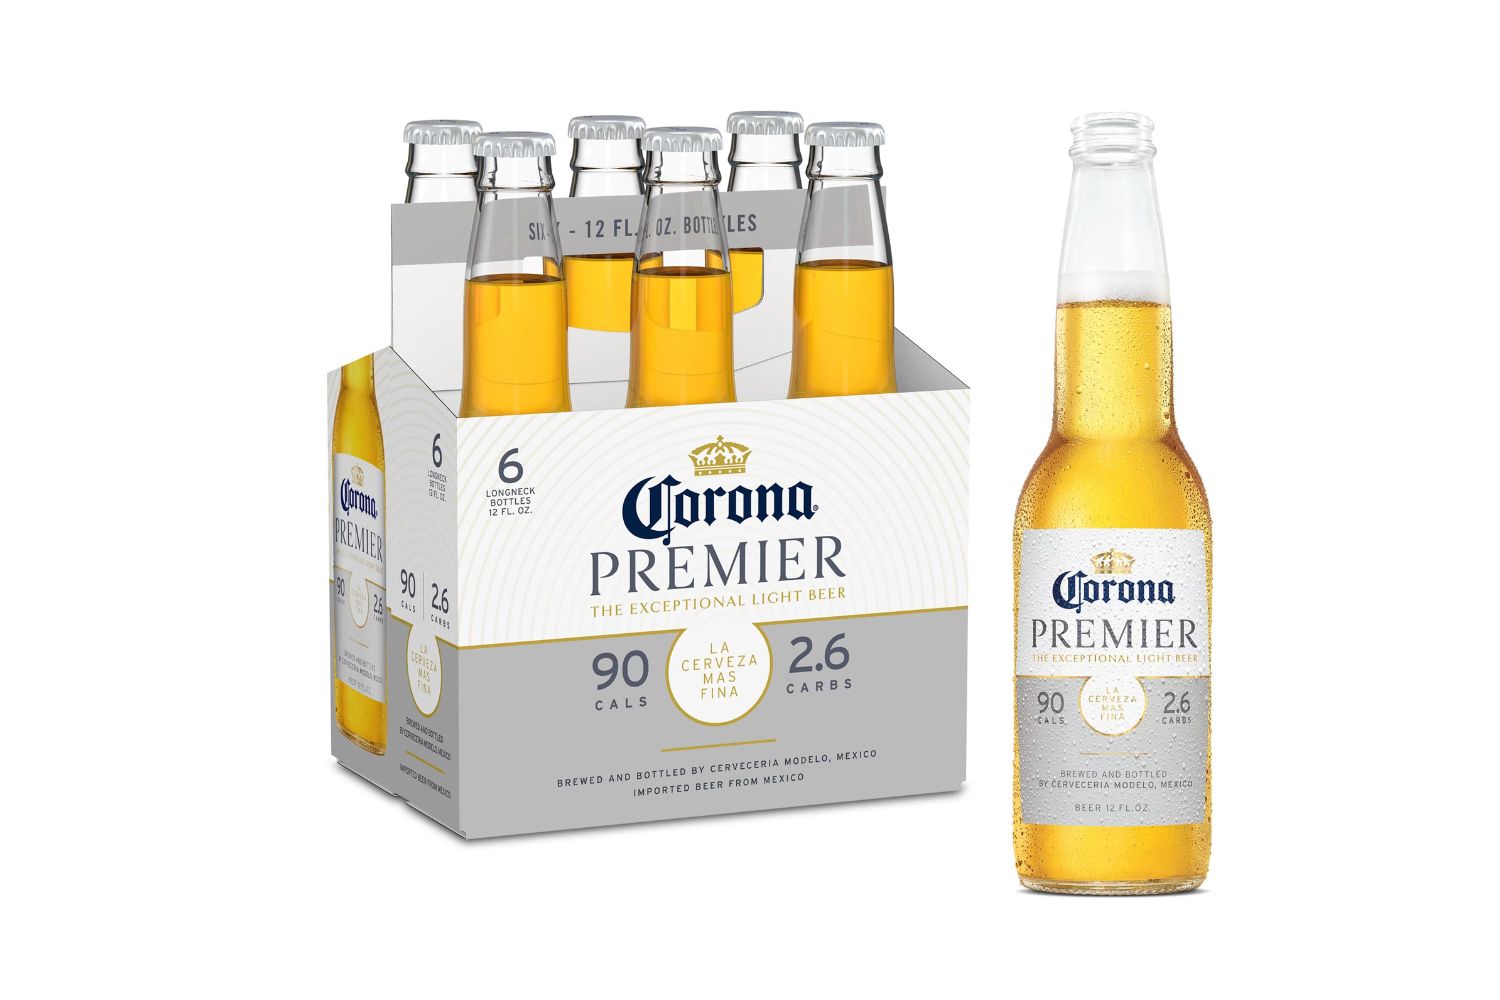 18-intriguing-facts-about-corona-premier